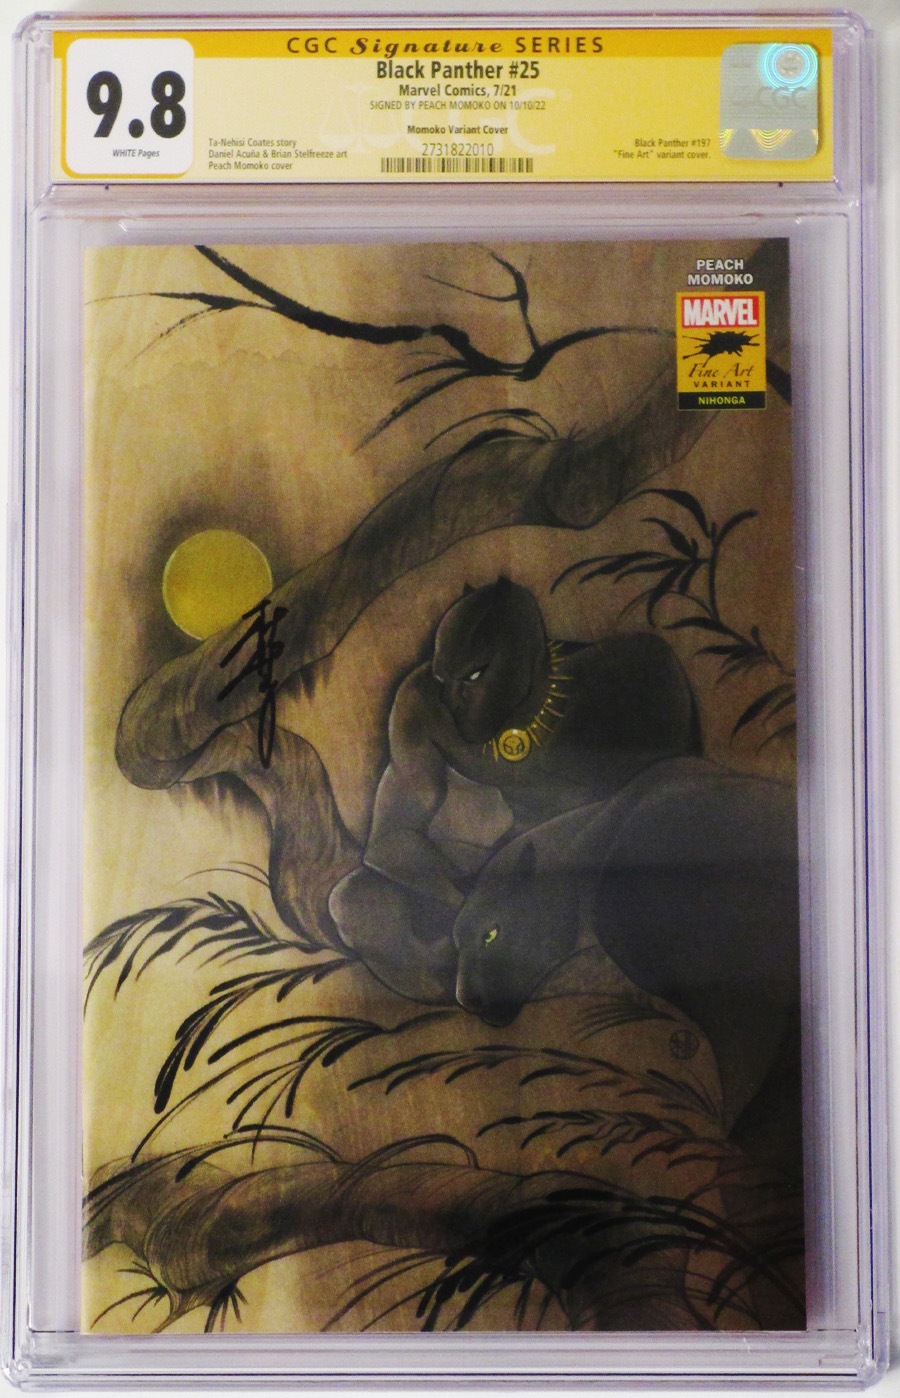 Black Panther Vol 7 #25 Cover N Variant Peach Momoko Stormbreakers Cover Signed by Peach Momoko CGC Graded 9.8